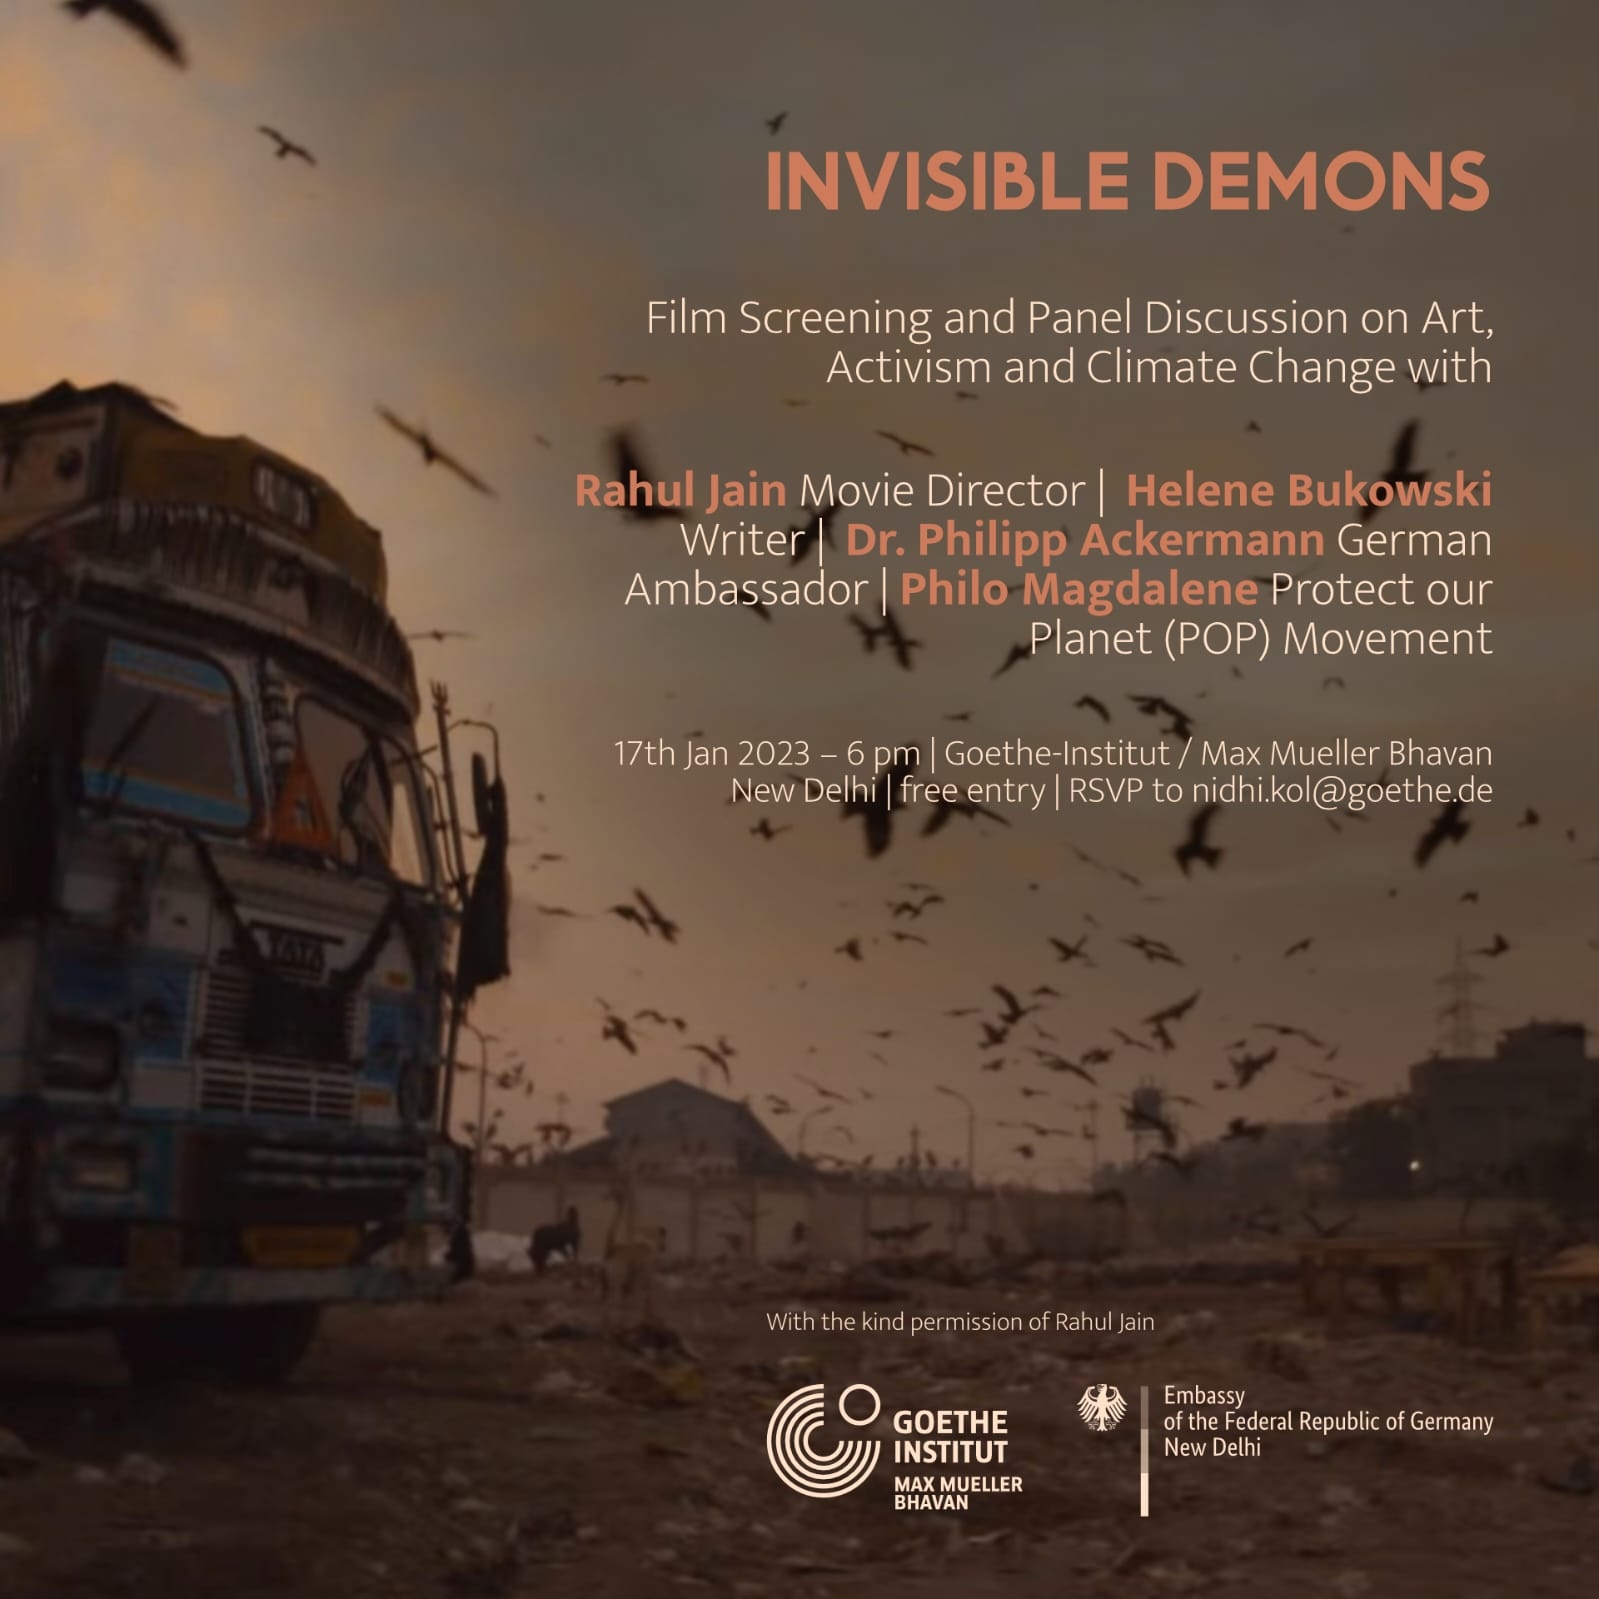 Art, Activism, and Climate Change: Film screening and panel discussion at the Goethe Institut, New Delhi